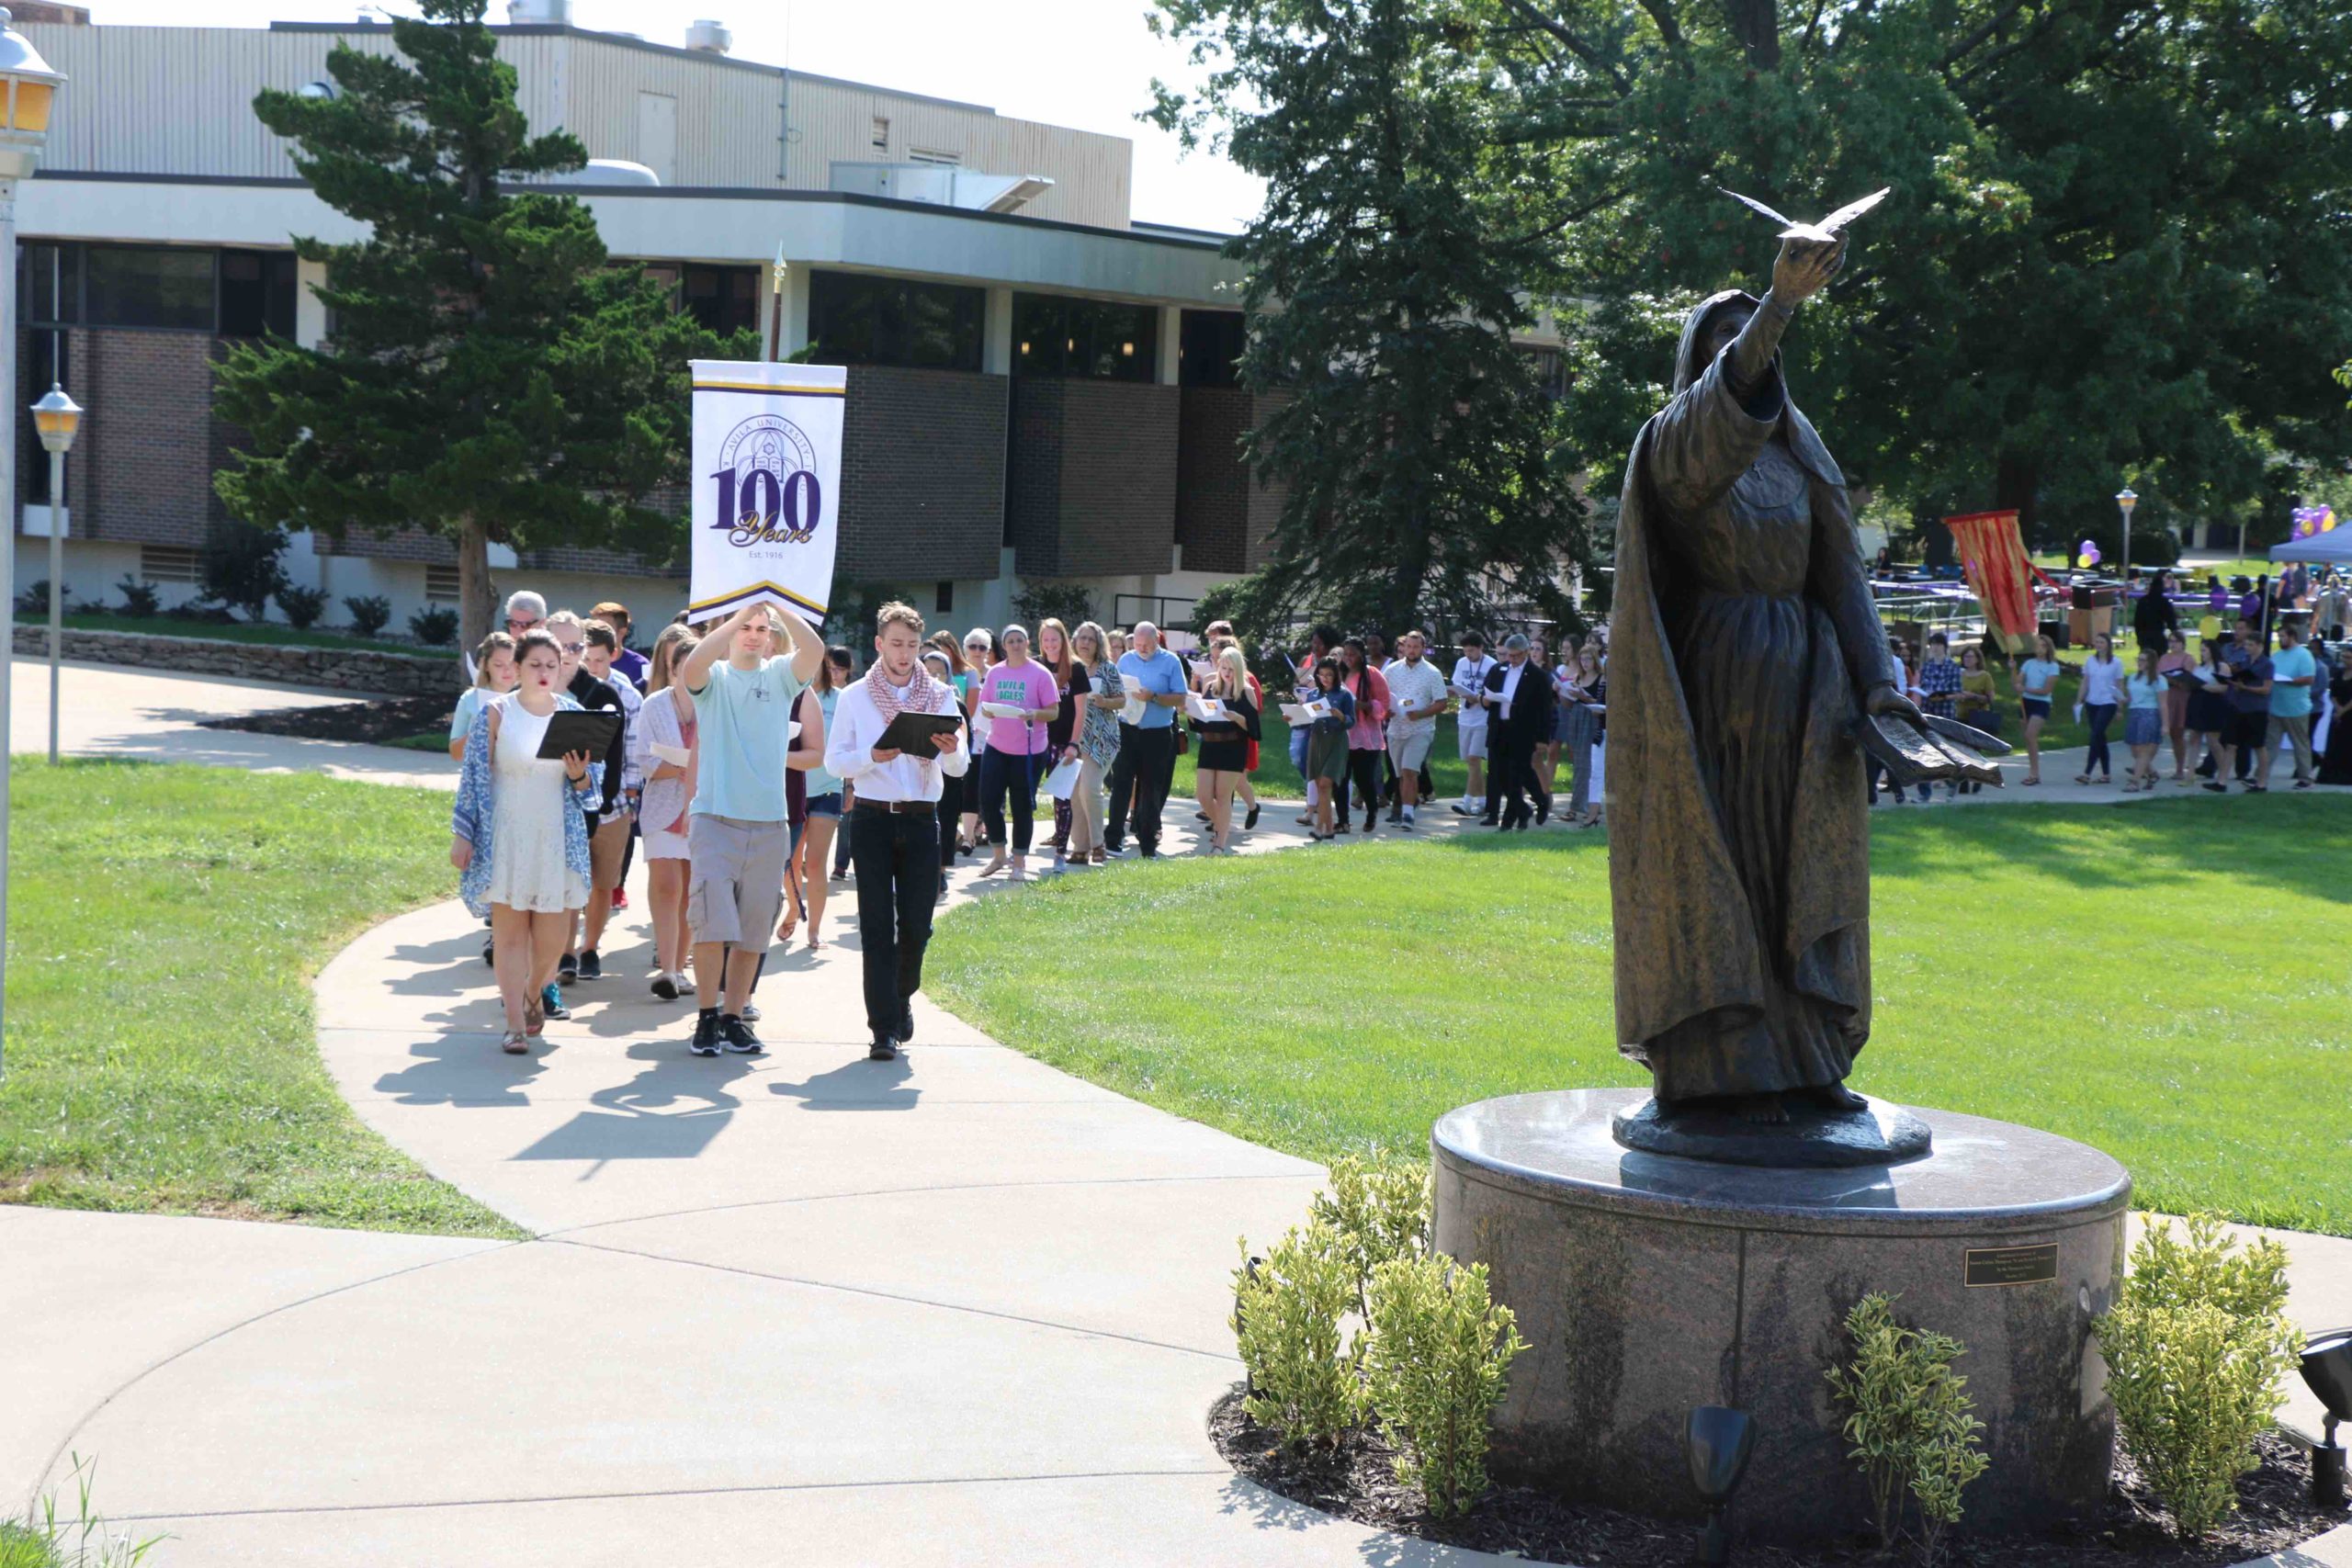 The Avila community marches across campus together in a long line promoting peace.